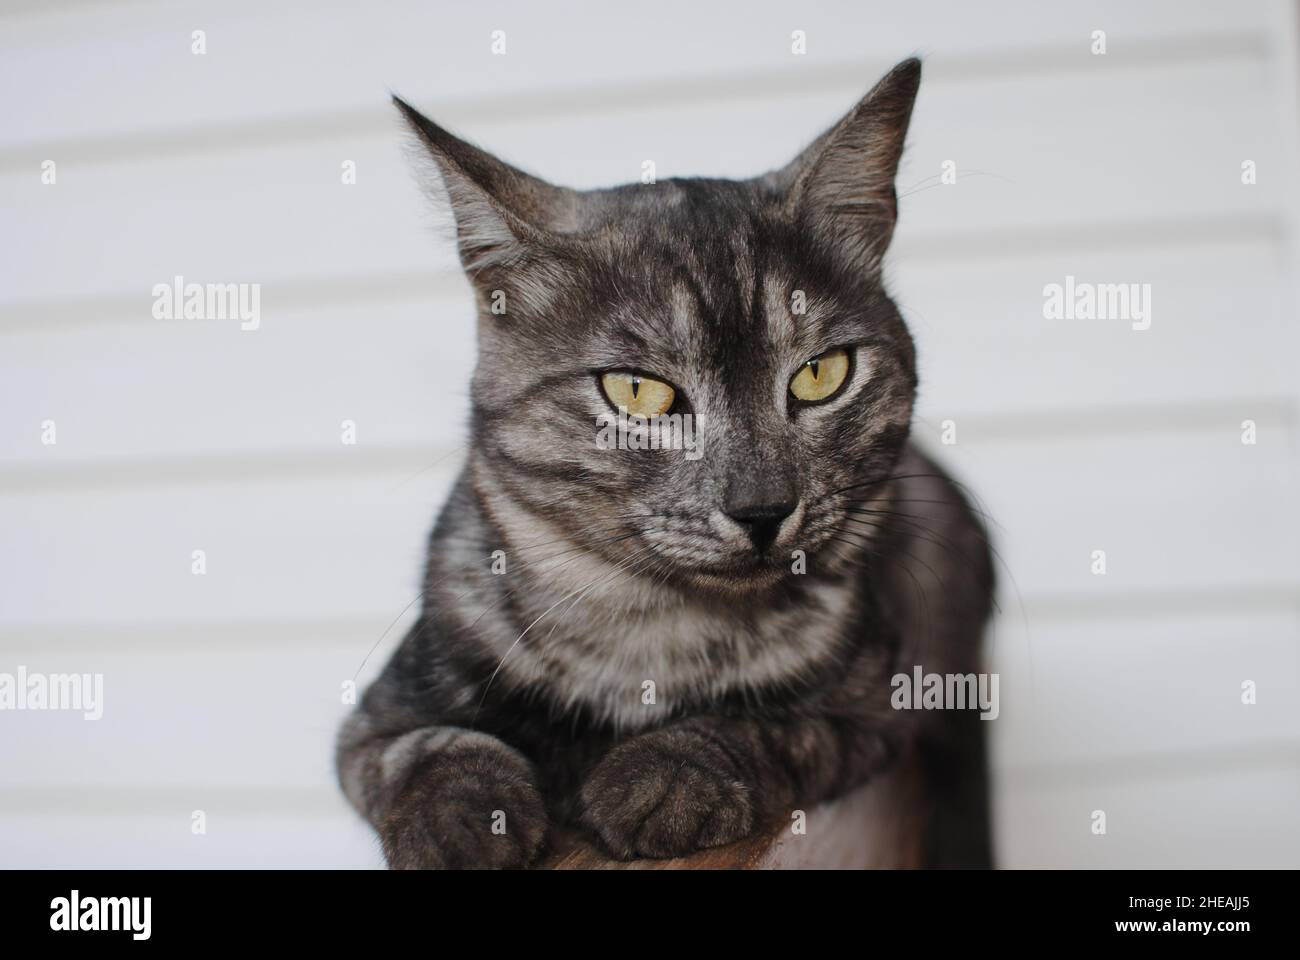 Striped cat, a cross between a breed of tabby mackerel, lies on a wooden bench against a background of white siding Stock Photo